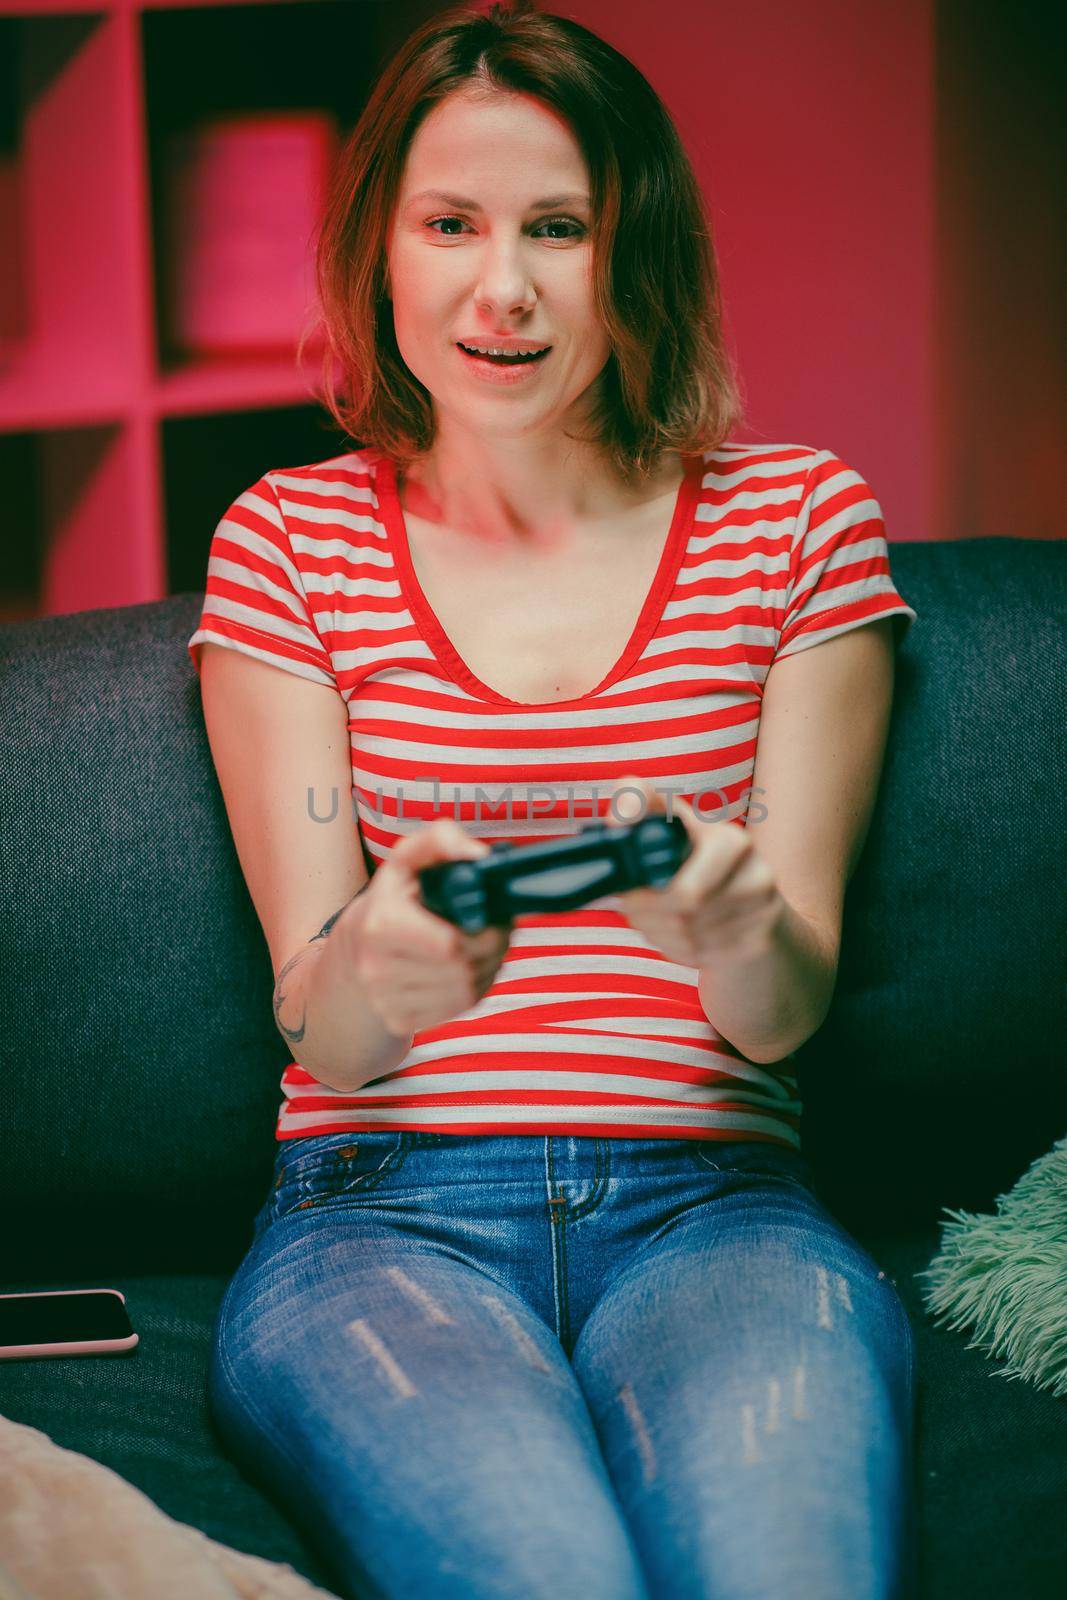 Girl playing a video game at living room at night. Gamer woman sitting on a sofa, playing in video games on a console and using a wireless controller.